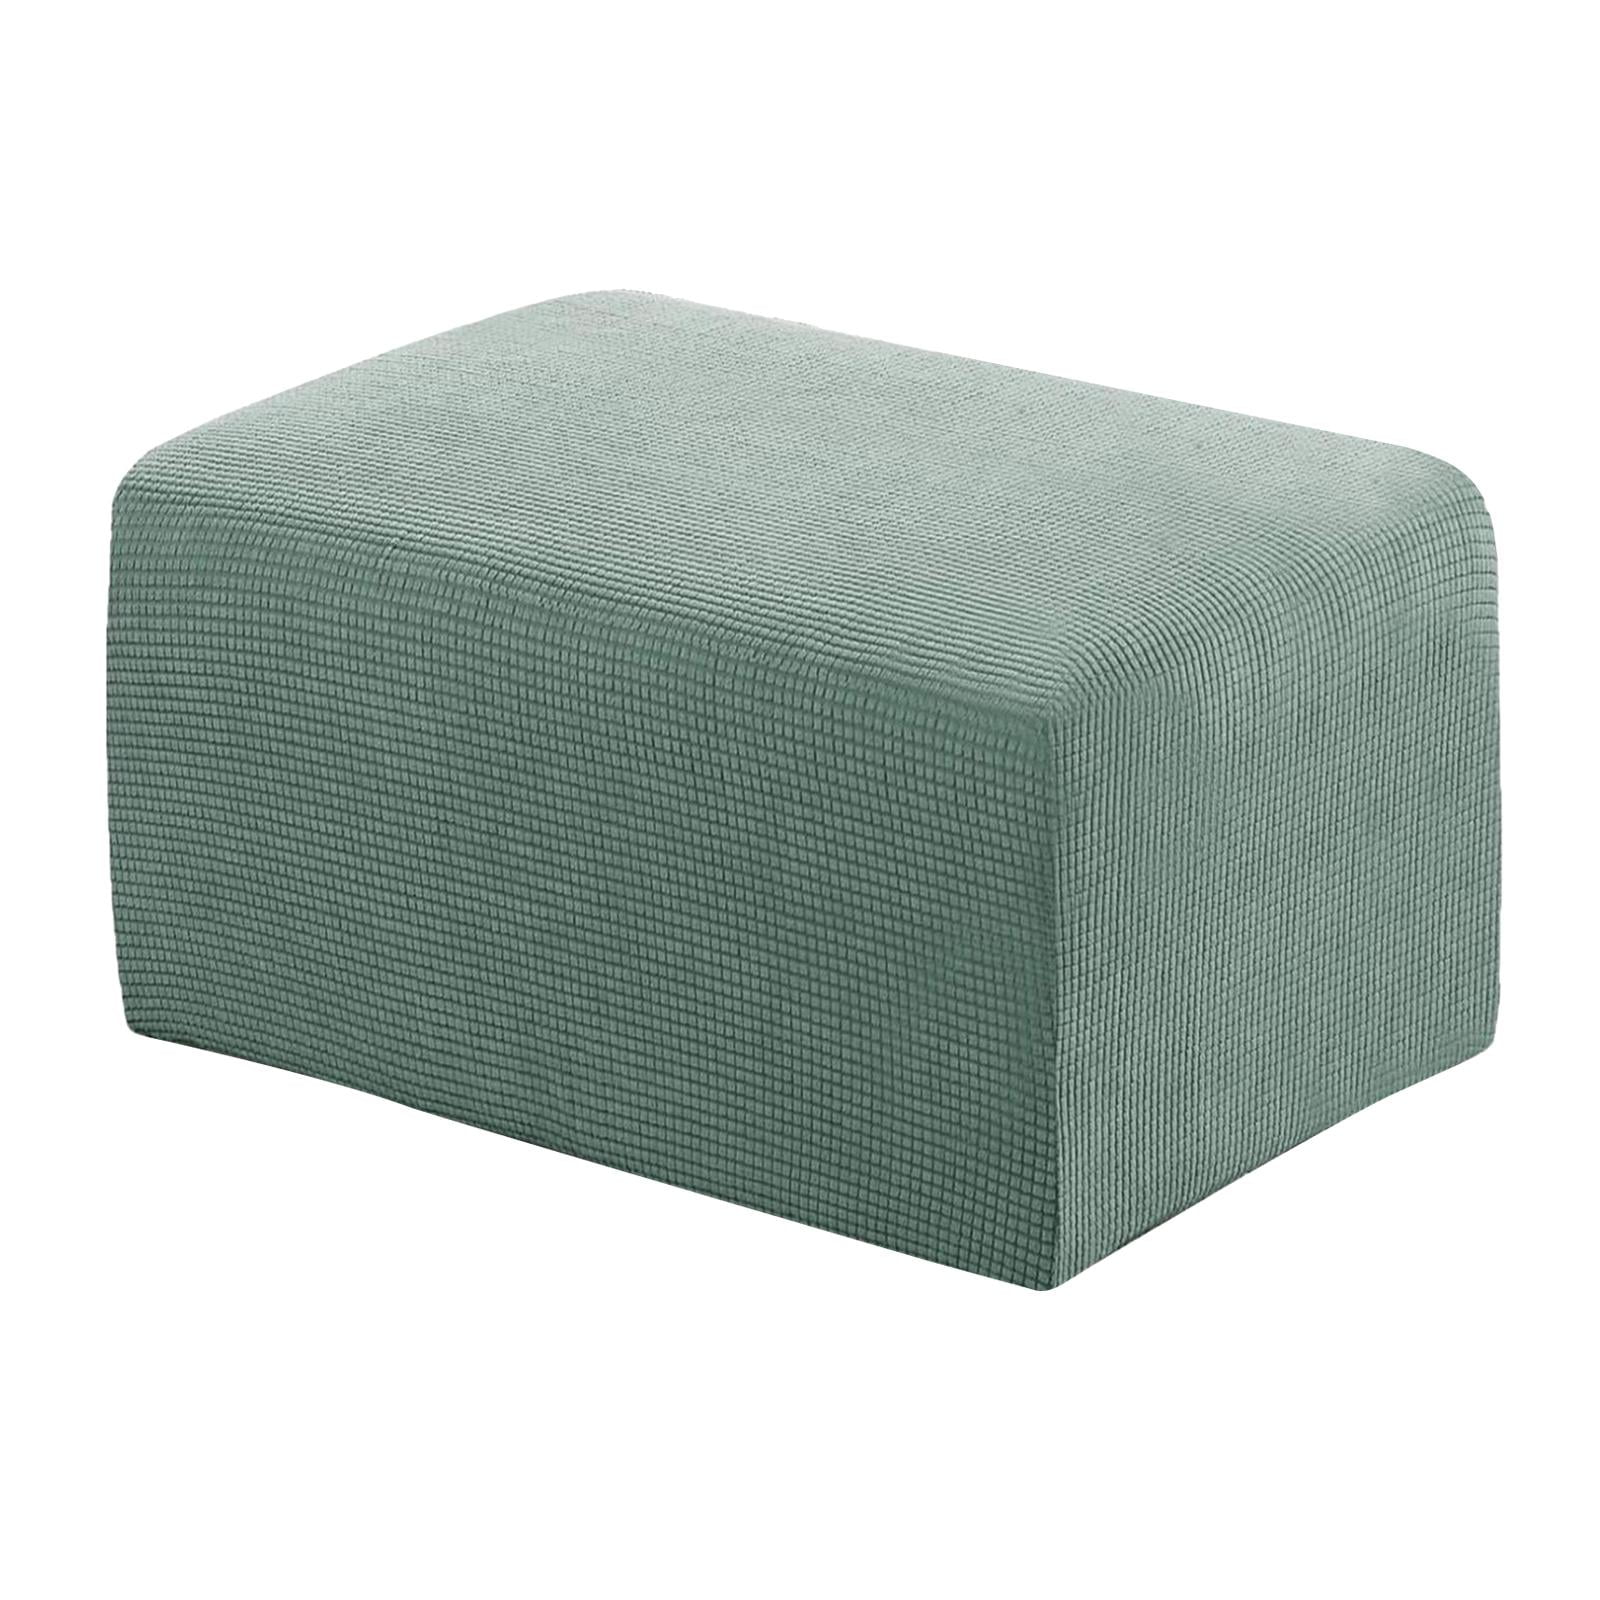 Stretch Elastic Jacquard Ottoman Pouf Cover Foot Rest Stool Slipcover Coffee 